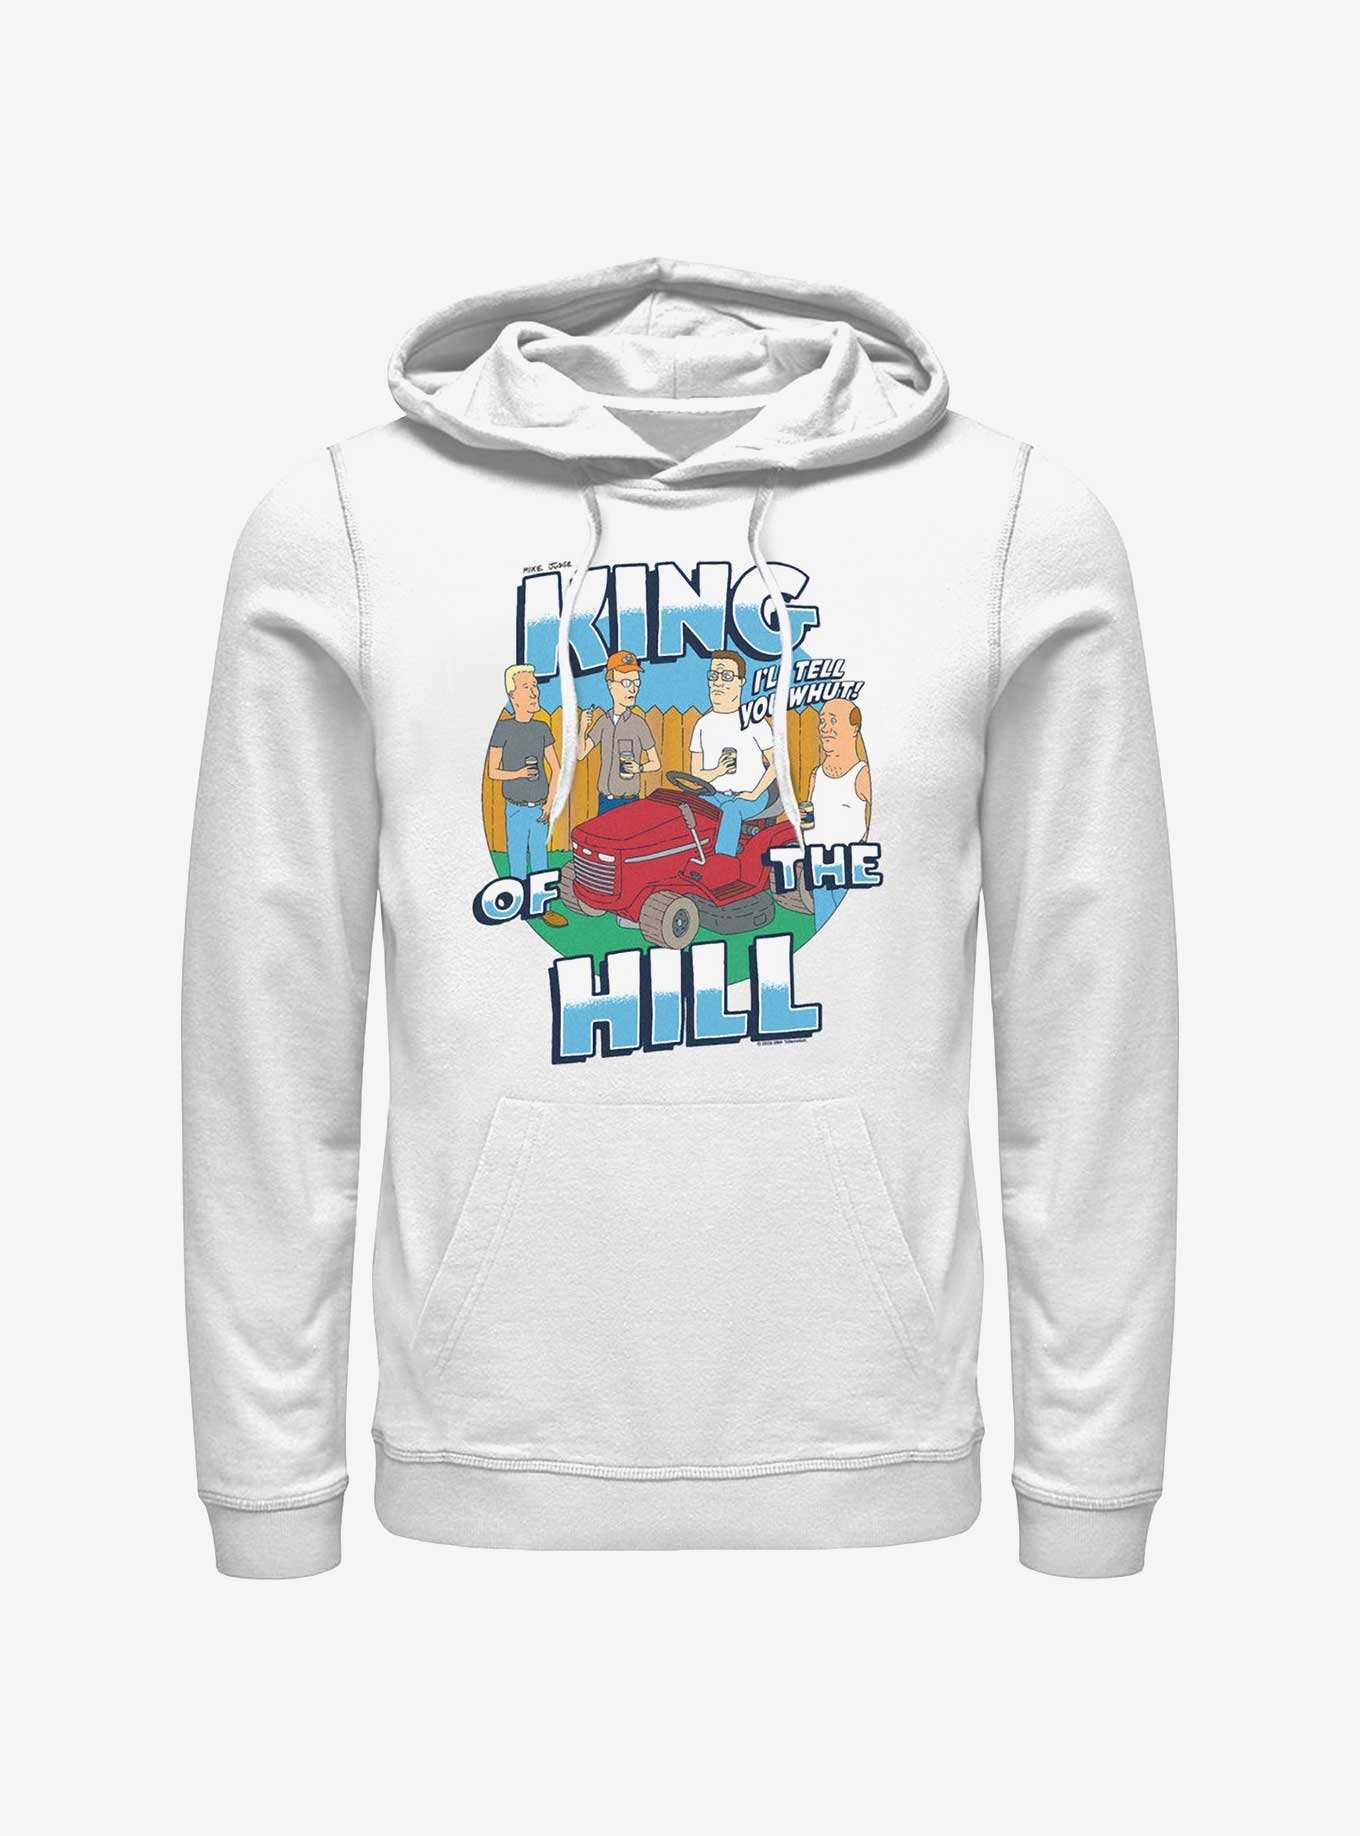 King Of The Hill Whut! Hoodie, , hi-res